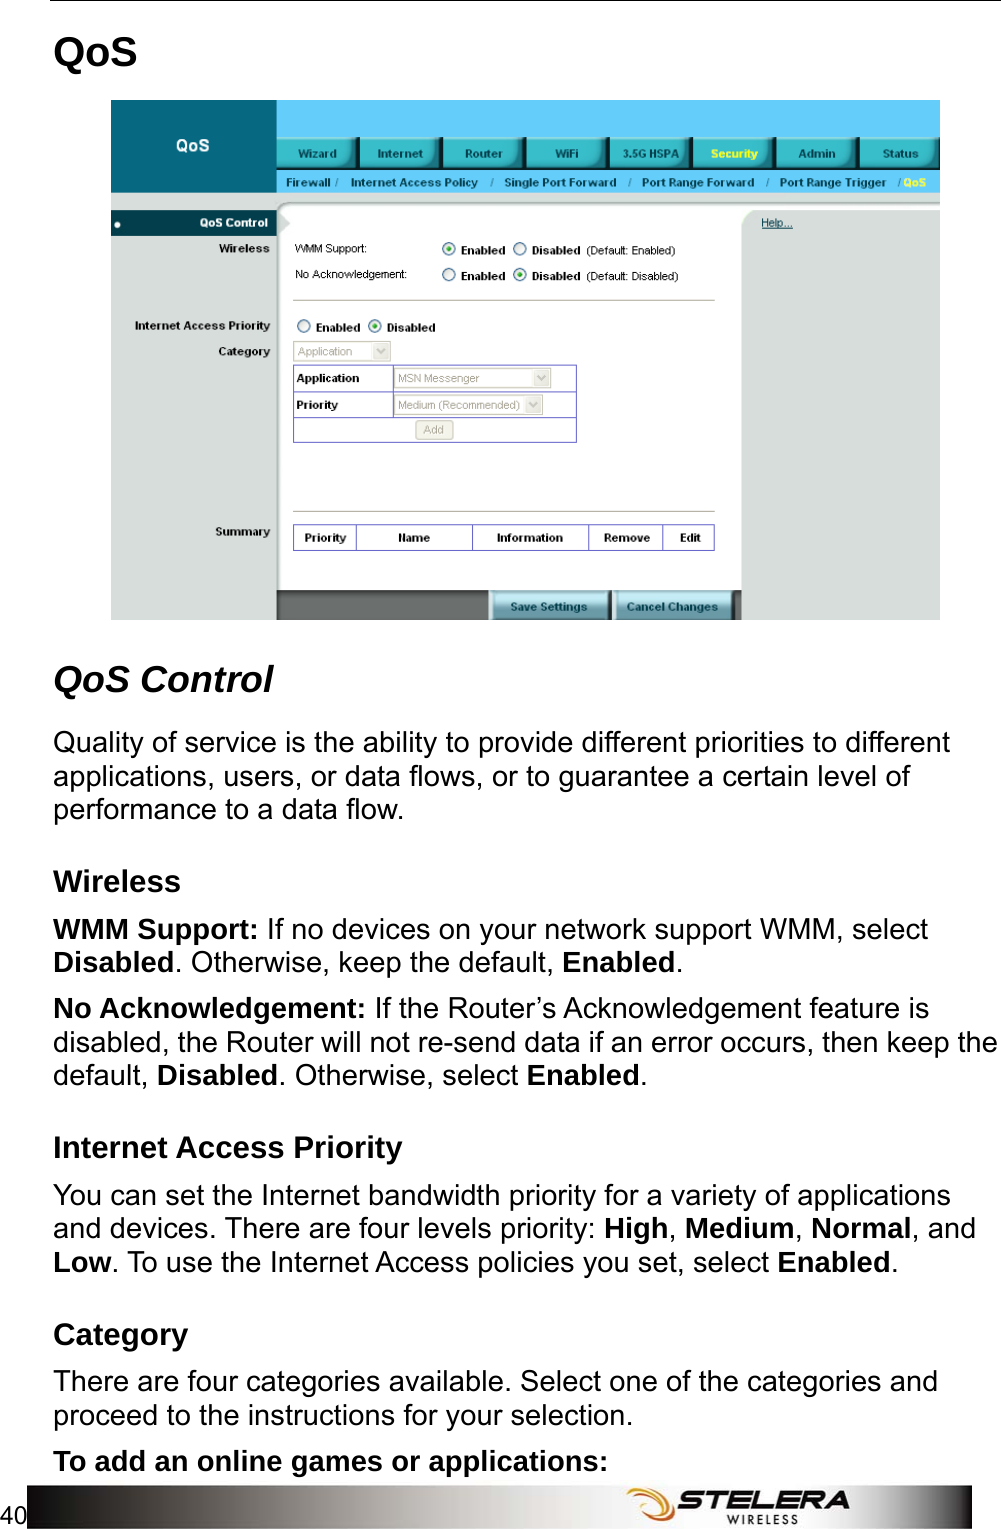 Security Setup 40   QoS  QoS Control Quality of service is the ability to provide different priorities to different applications, users, or data flows, or to guarantee a certain level of performance to a data flow. Wireless WMM Support: If no devices on your network support WMM, select Disabled. Otherwise, keep the default, Enabled. No Acknowledgement: If the Router’s Acknowledgement feature is disabled, the Router will not re-send data if an error occurs, then keep the default, Disabled. Otherwise, select Enabled. Internet Access Priority You can set the Internet bandwidth priority for a variety of applications and devices. There are four levels priority: High, Medium, Normal, and Low. To use the Internet Access policies you set, select Enabled. Category There are four categories available. Select one of the categories and proceed to the instructions for your selection. To add an online games or applications: 